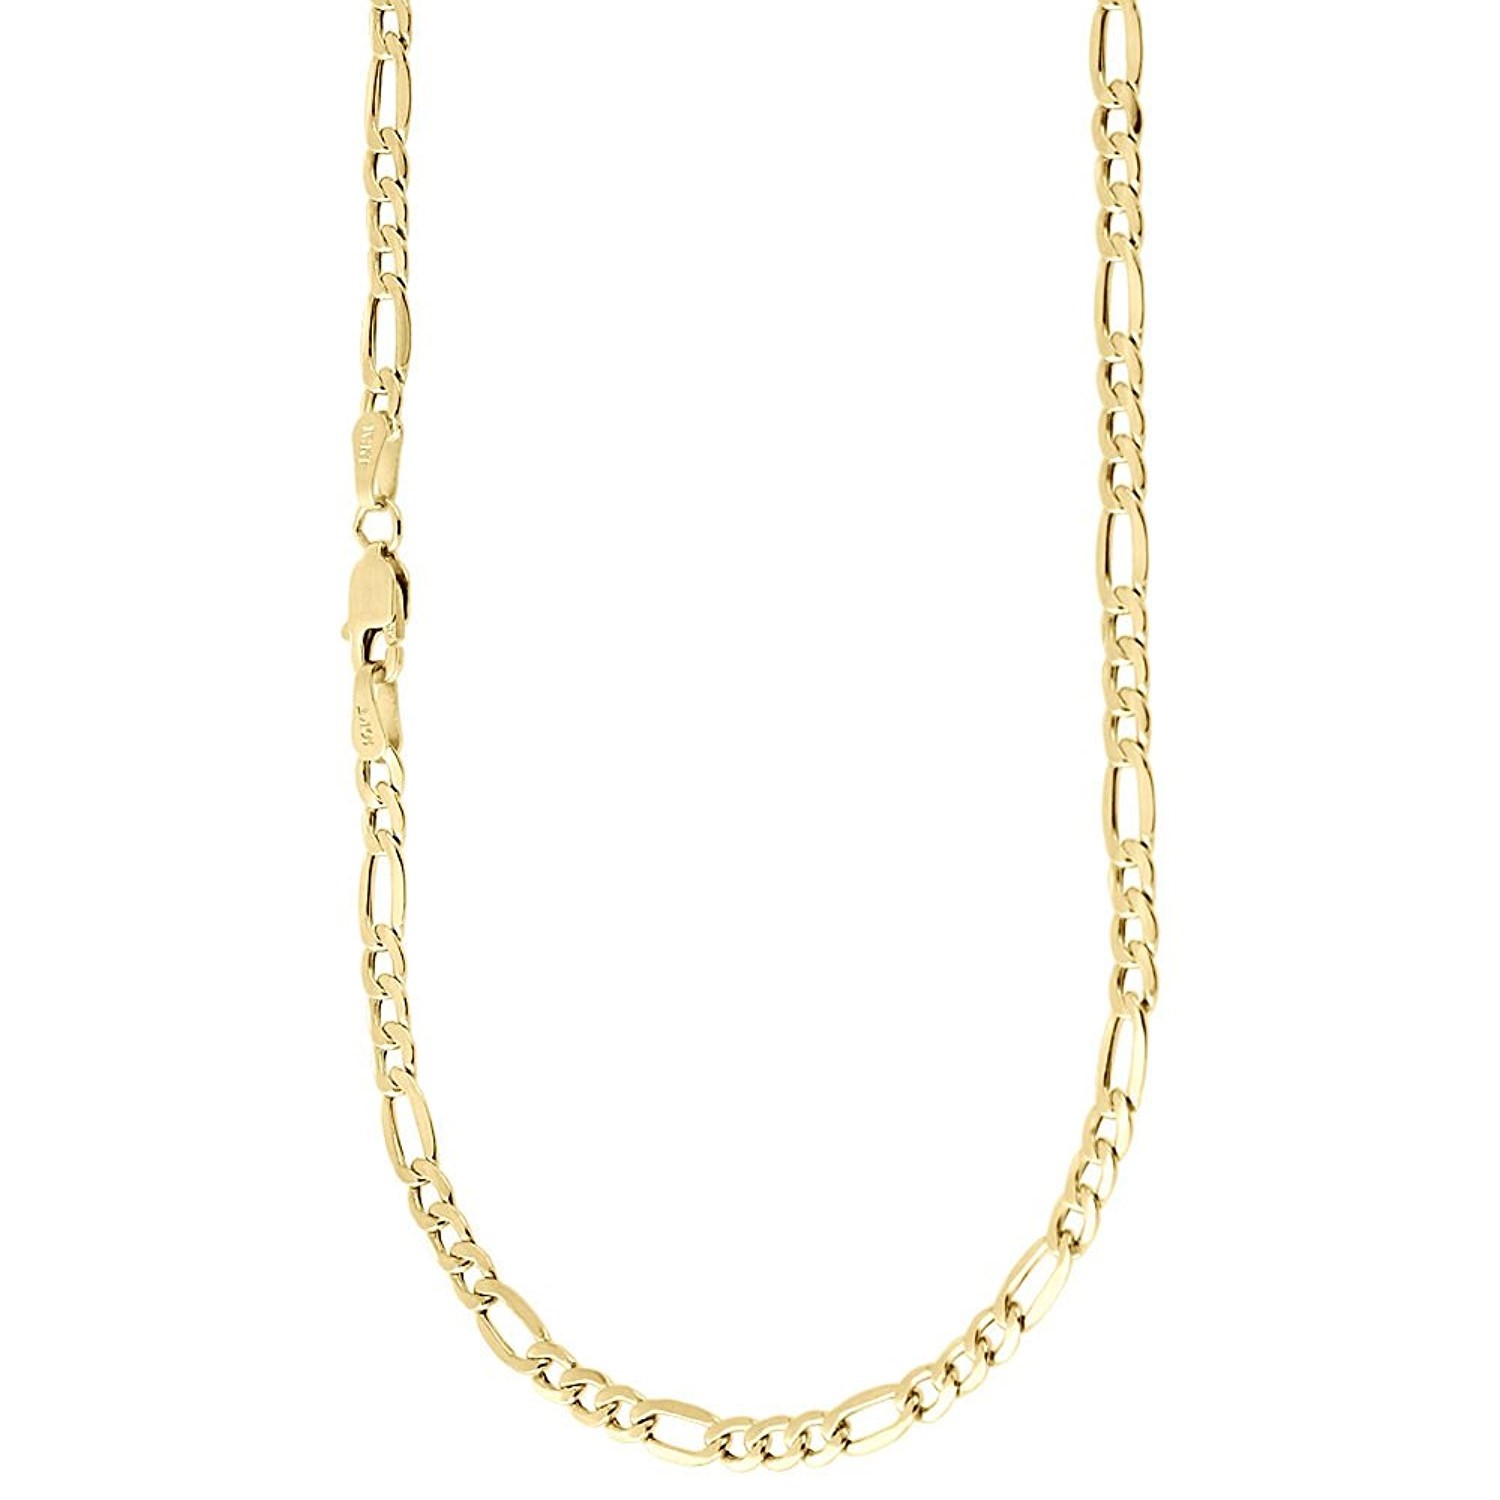 Jewelers 14K Solid Gold 3.4MM Figaro Chain Necklace BOXED - image 1 of 3